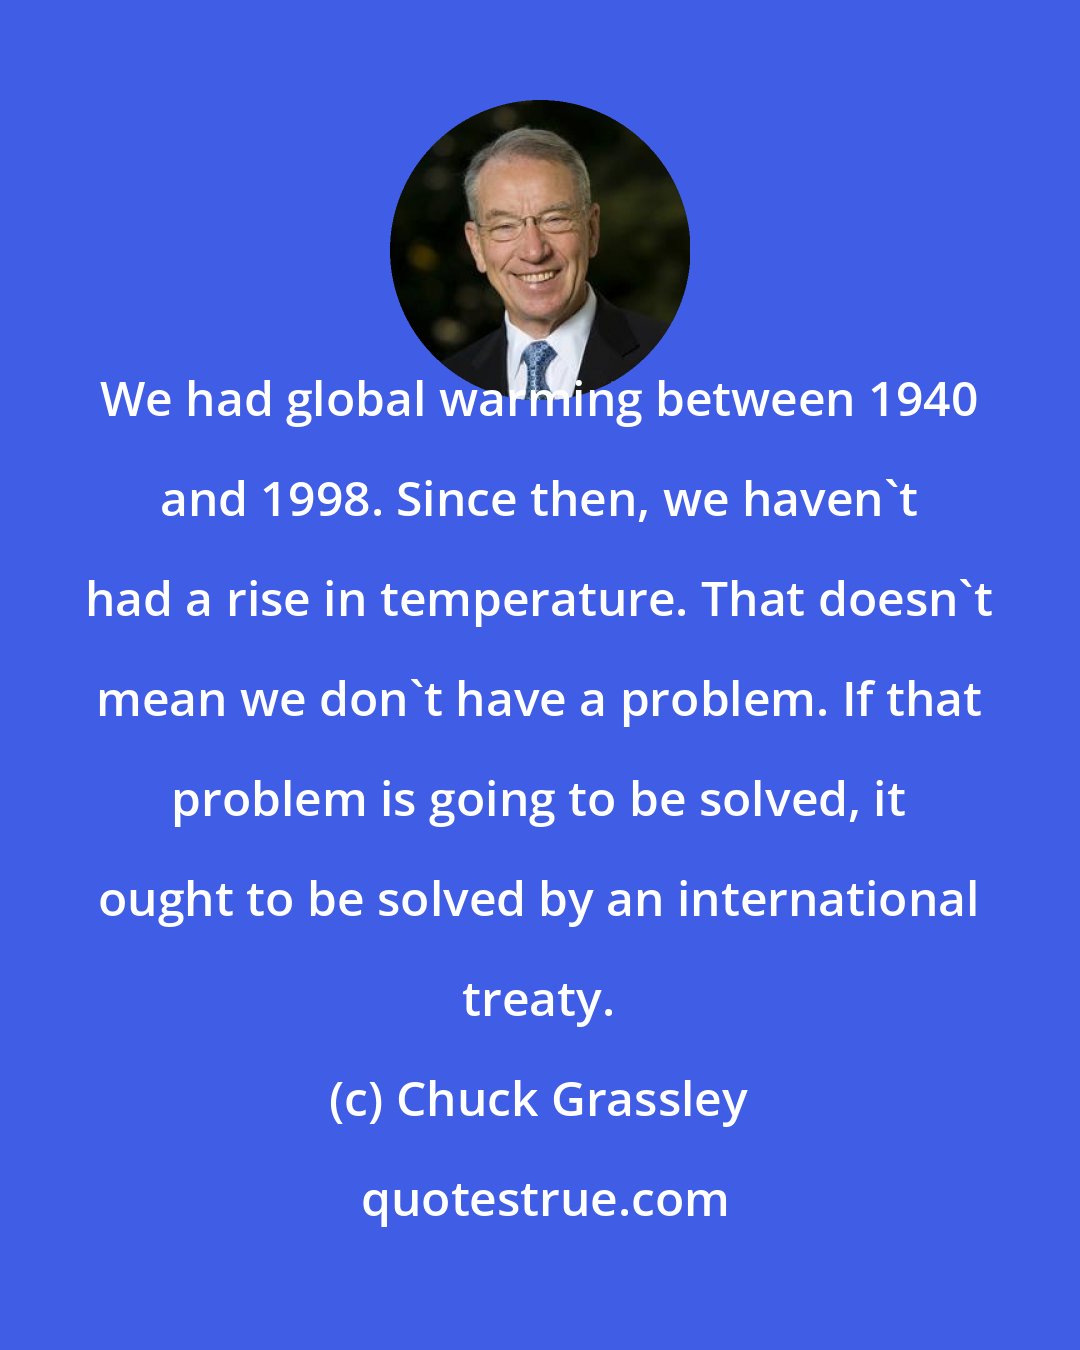 Chuck Grassley: We had global warming between 1940 and 1998. Since then, we haven't had a rise in temperature. That doesn't mean we don't have a problem. If that problem is going to be solved, it ought to be solved by an international treaty.